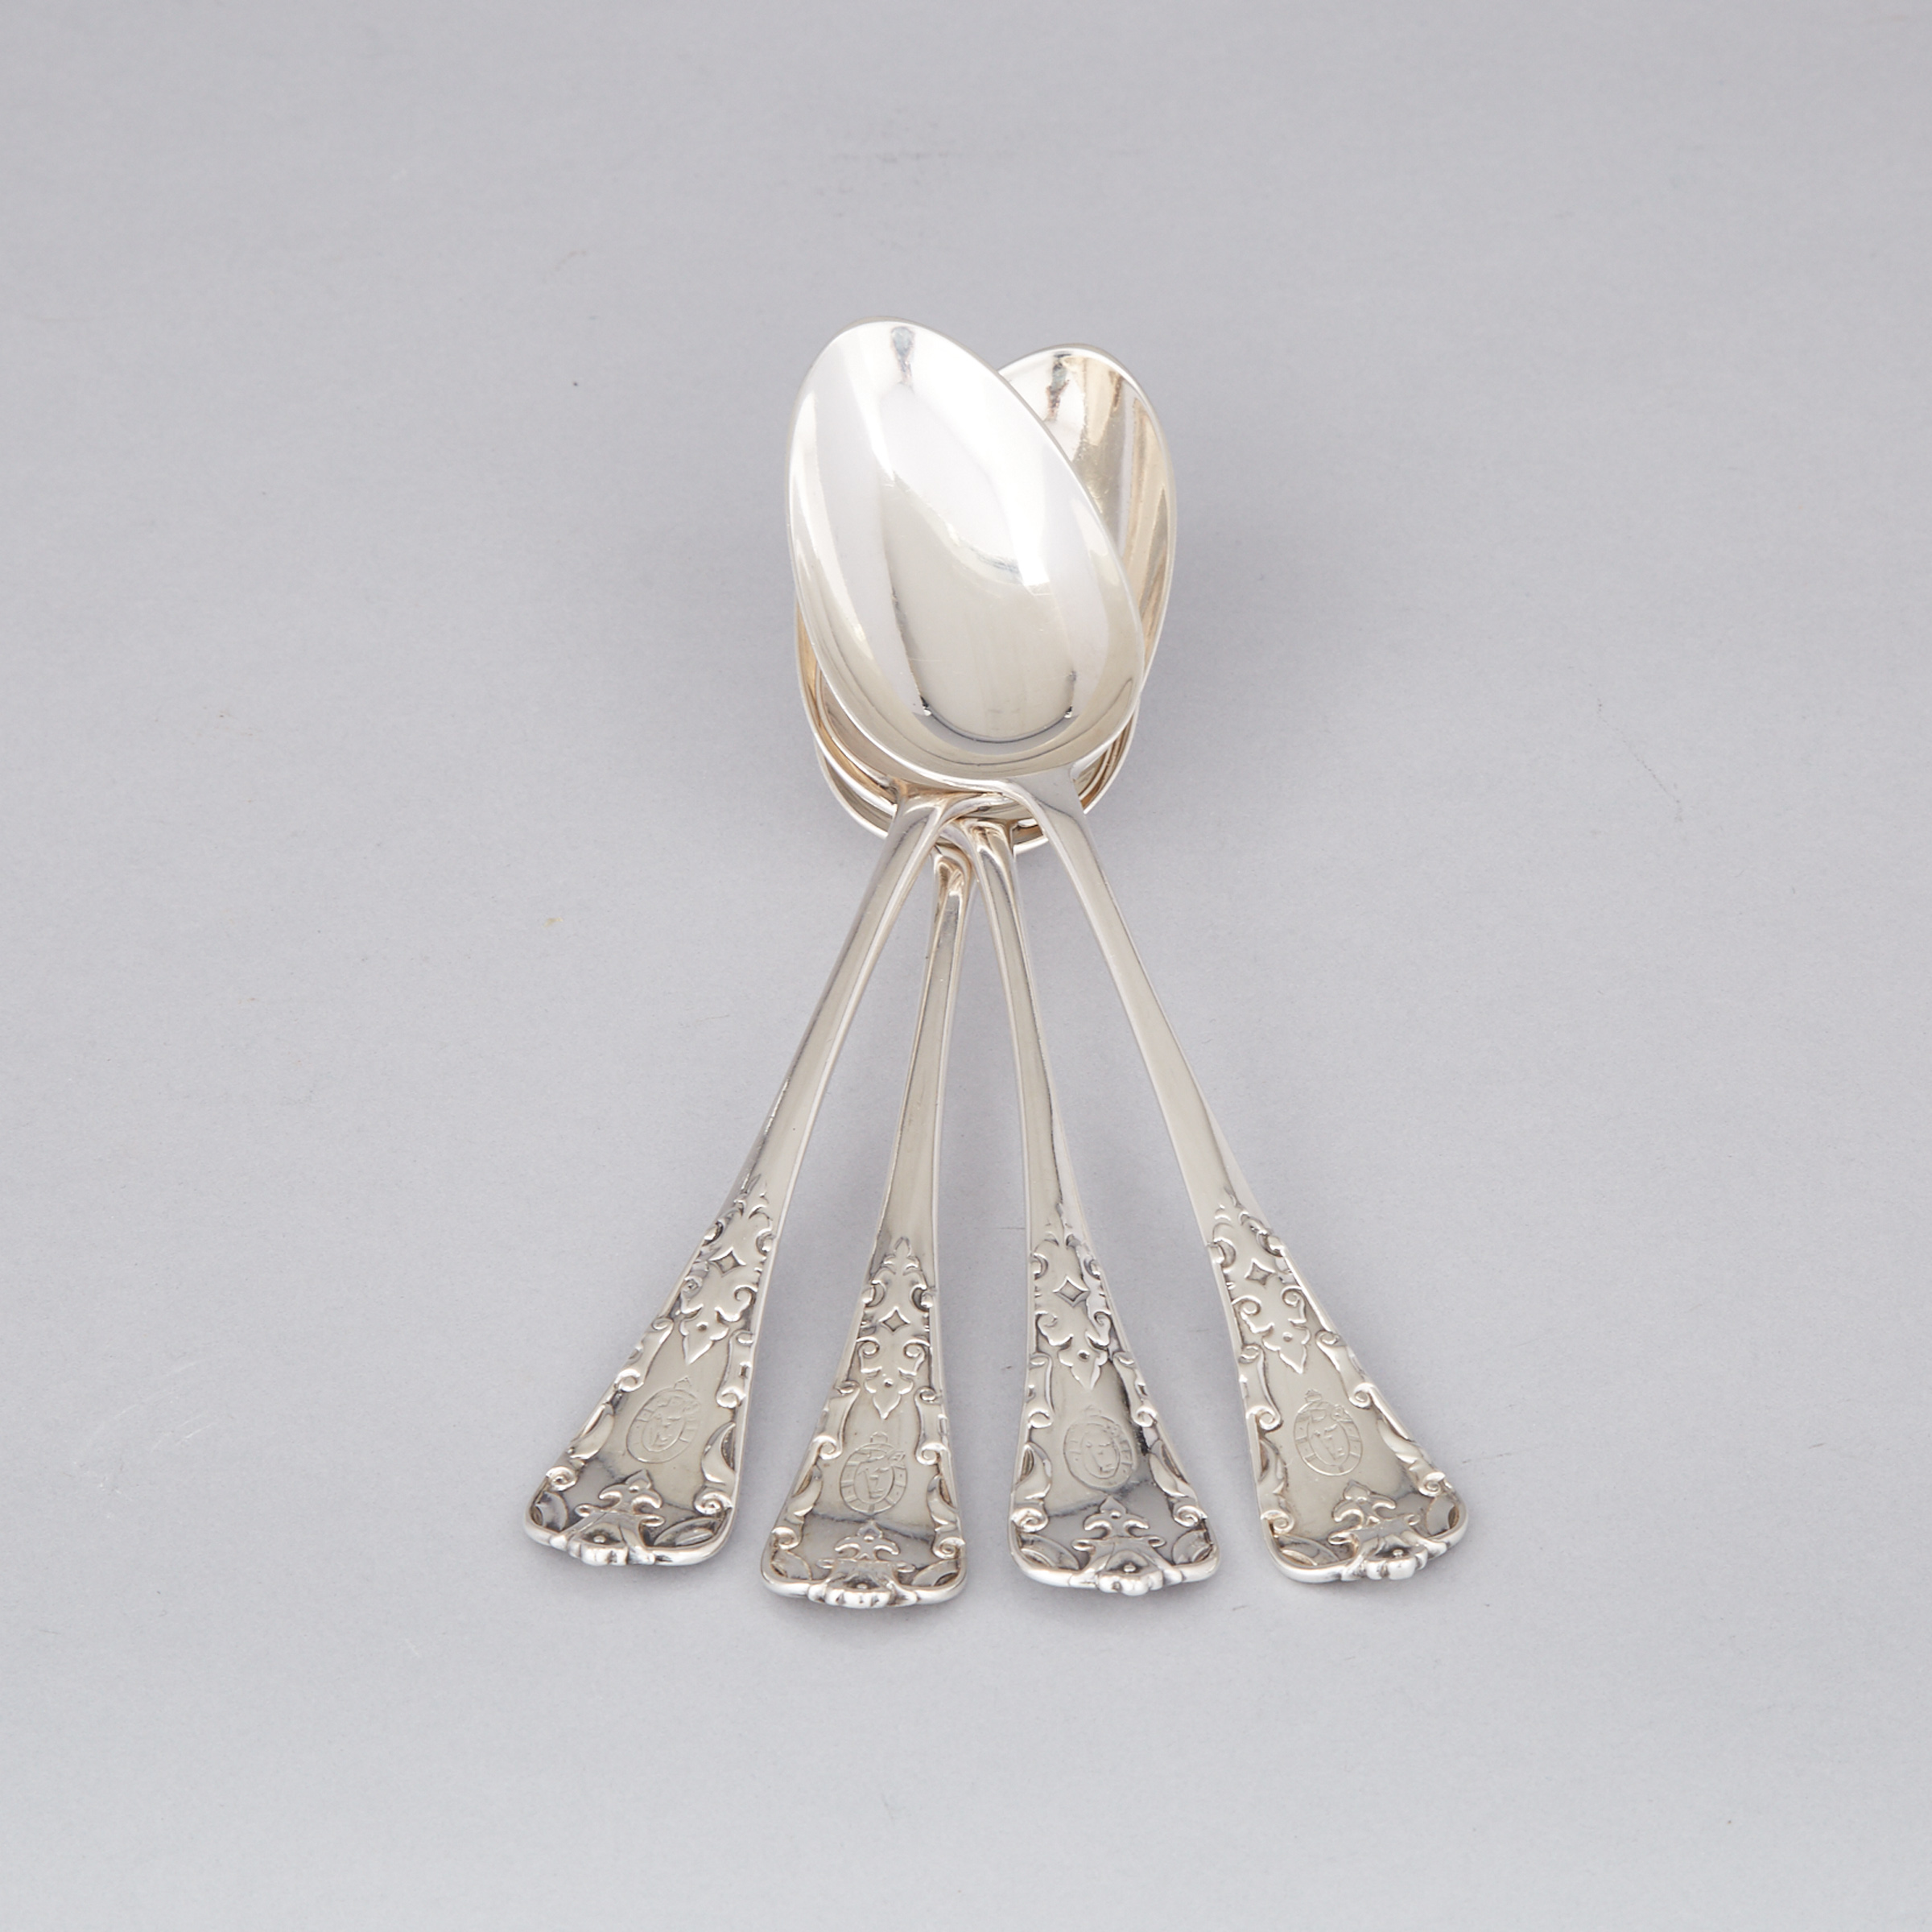 Four Victorian Silver Straight Tudor Pattern Table Spoons, George Adams, London, 1854